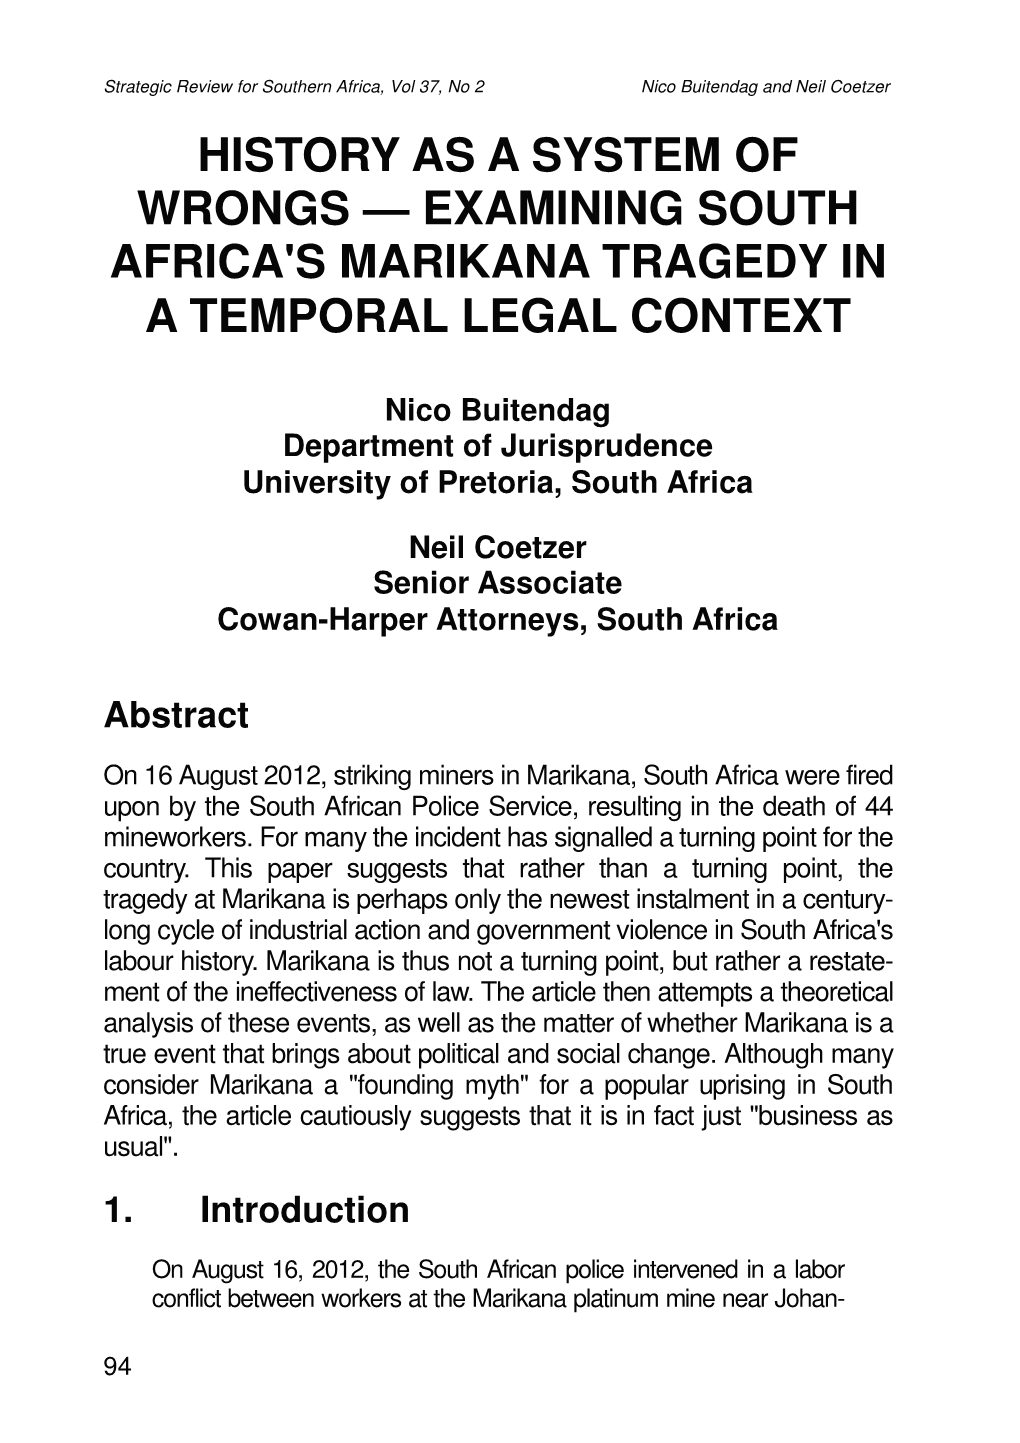 History As a System of Wrongs — Examining South Africa's Marikana Tragedy in a Temporal Legal Context